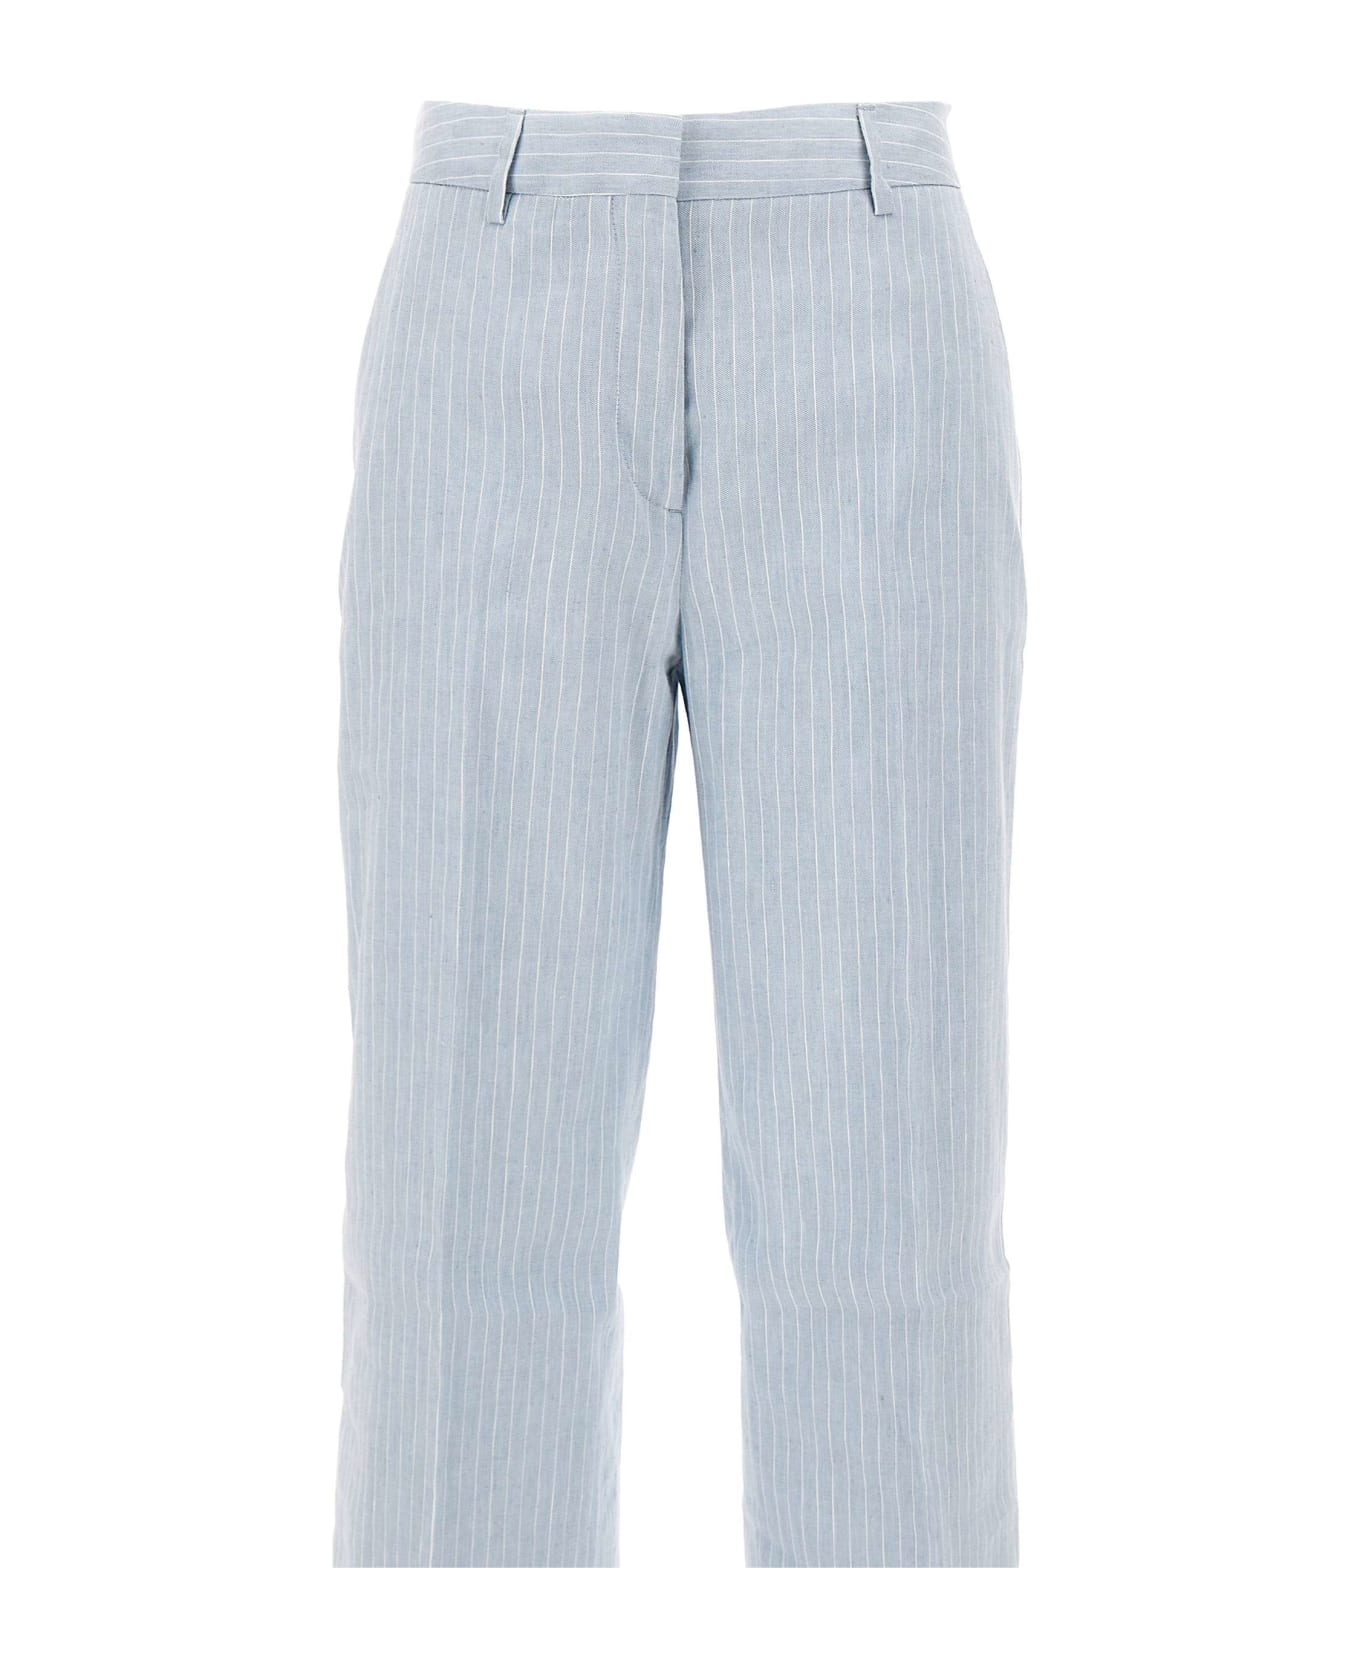 Iceberg Linen And Cotton Trousers - LIGHT BLUE ボトムス